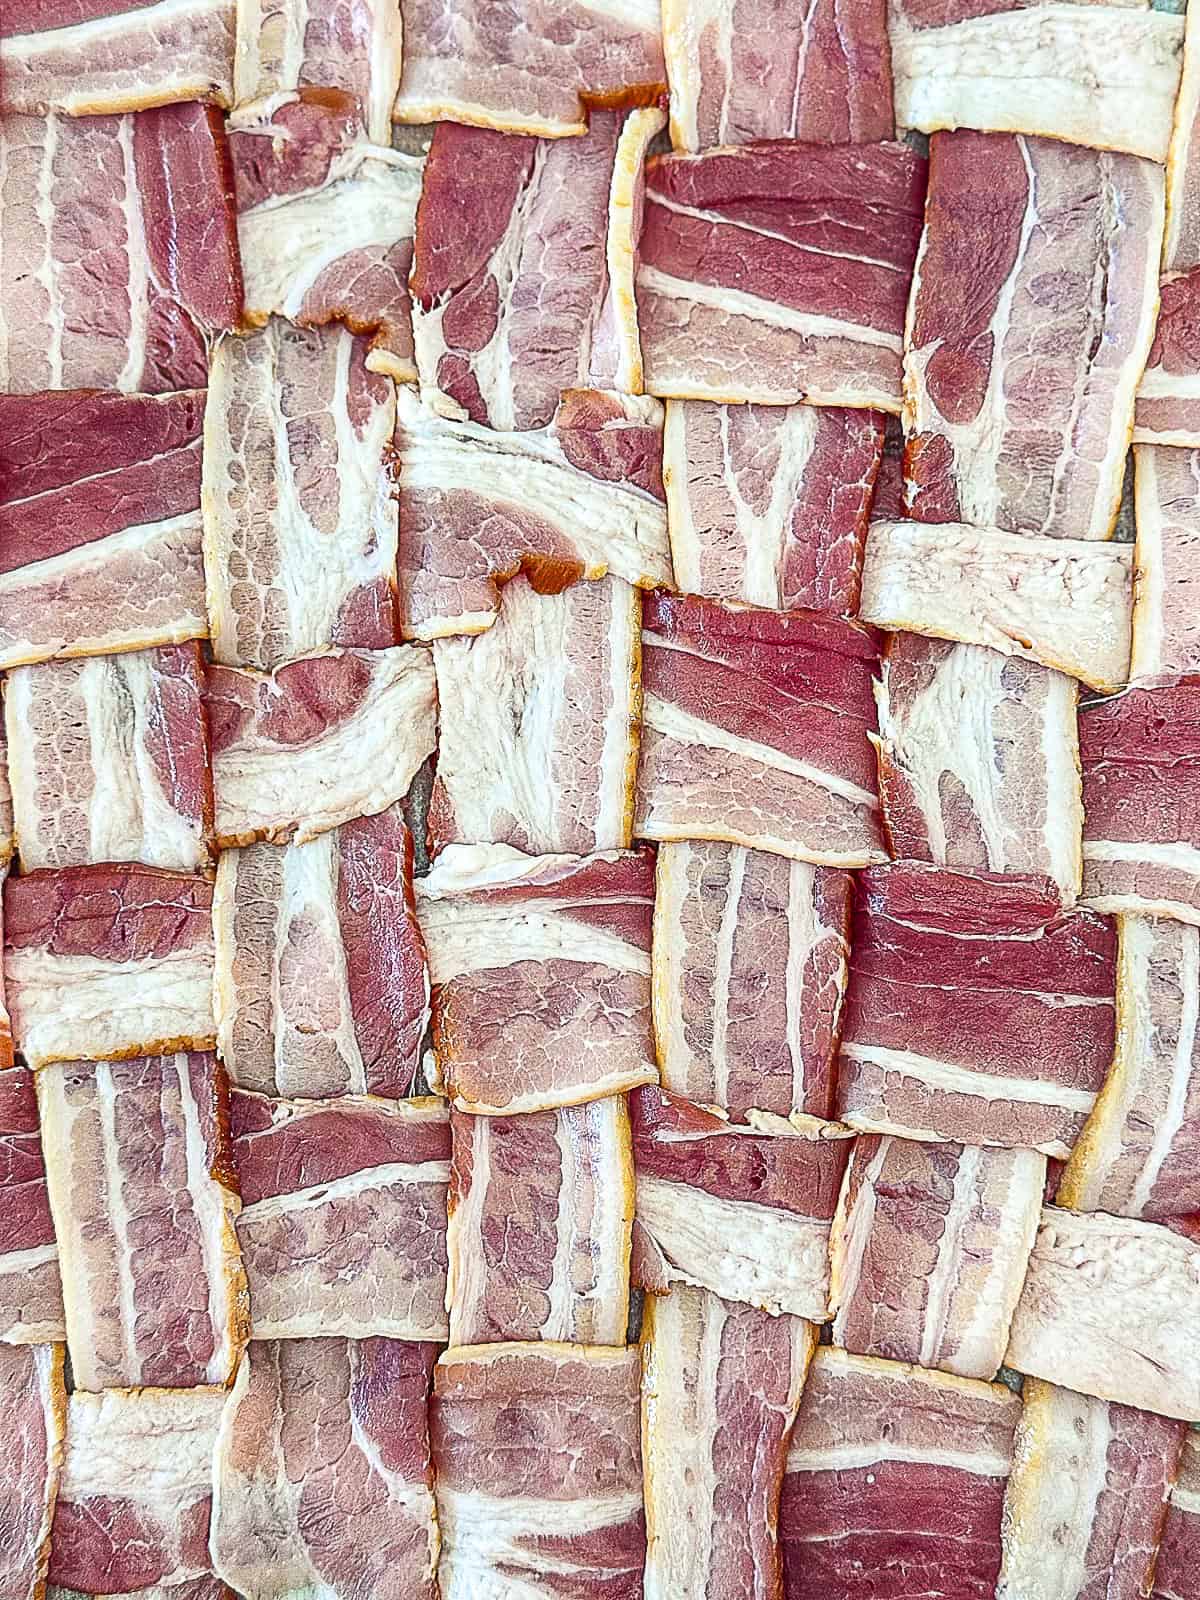 Completed Bacon Weave